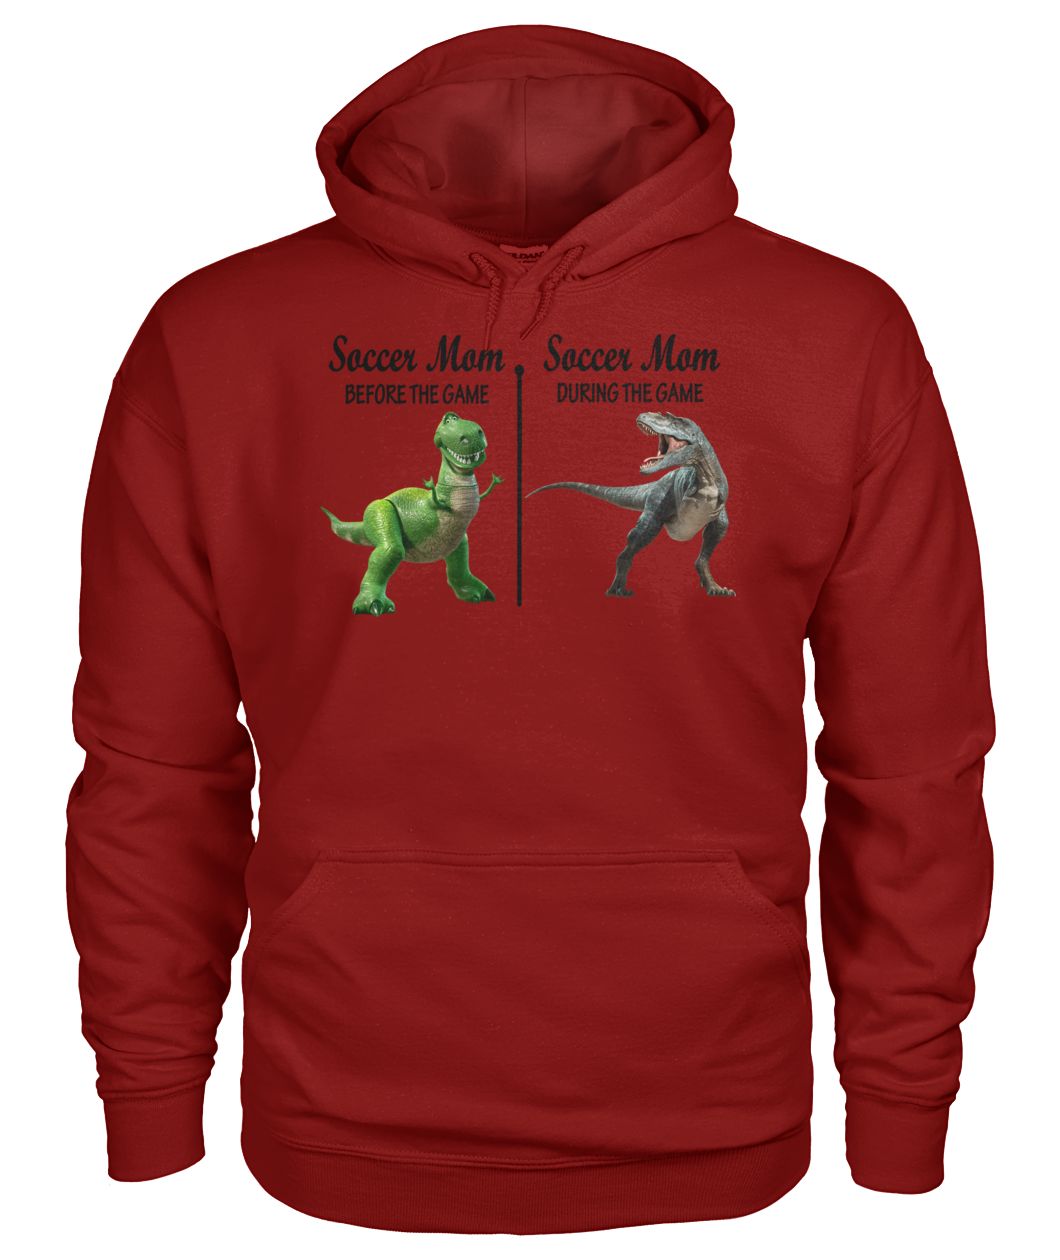 Rex dinosaur soccer mom before the game during the game gildan hoodie